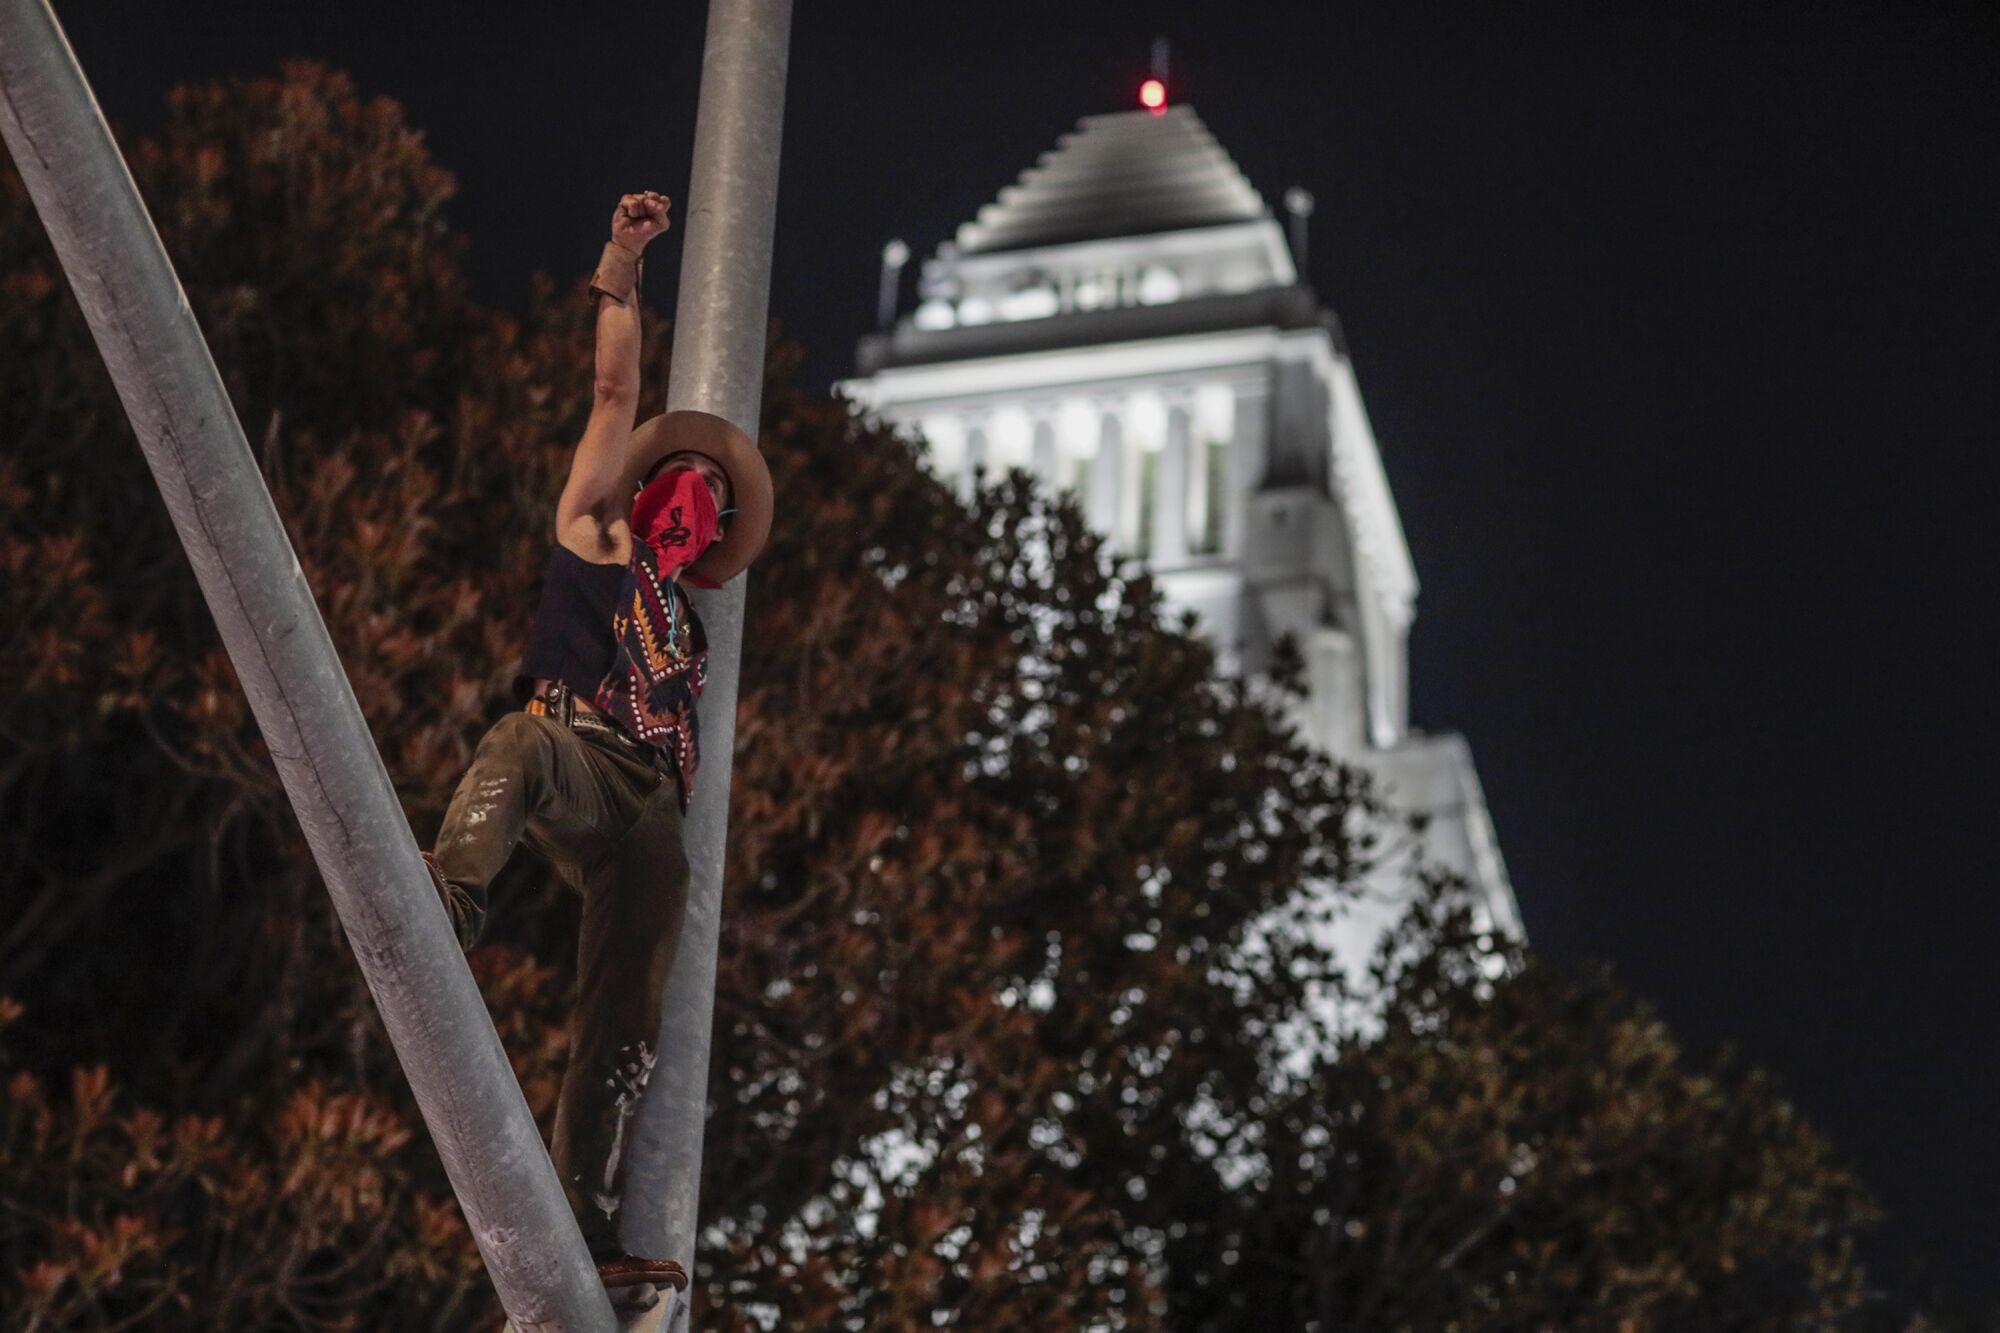 A lone demonstrator climbs a light pole at the corner of Main and 1st Street in downtown Los Angeles.